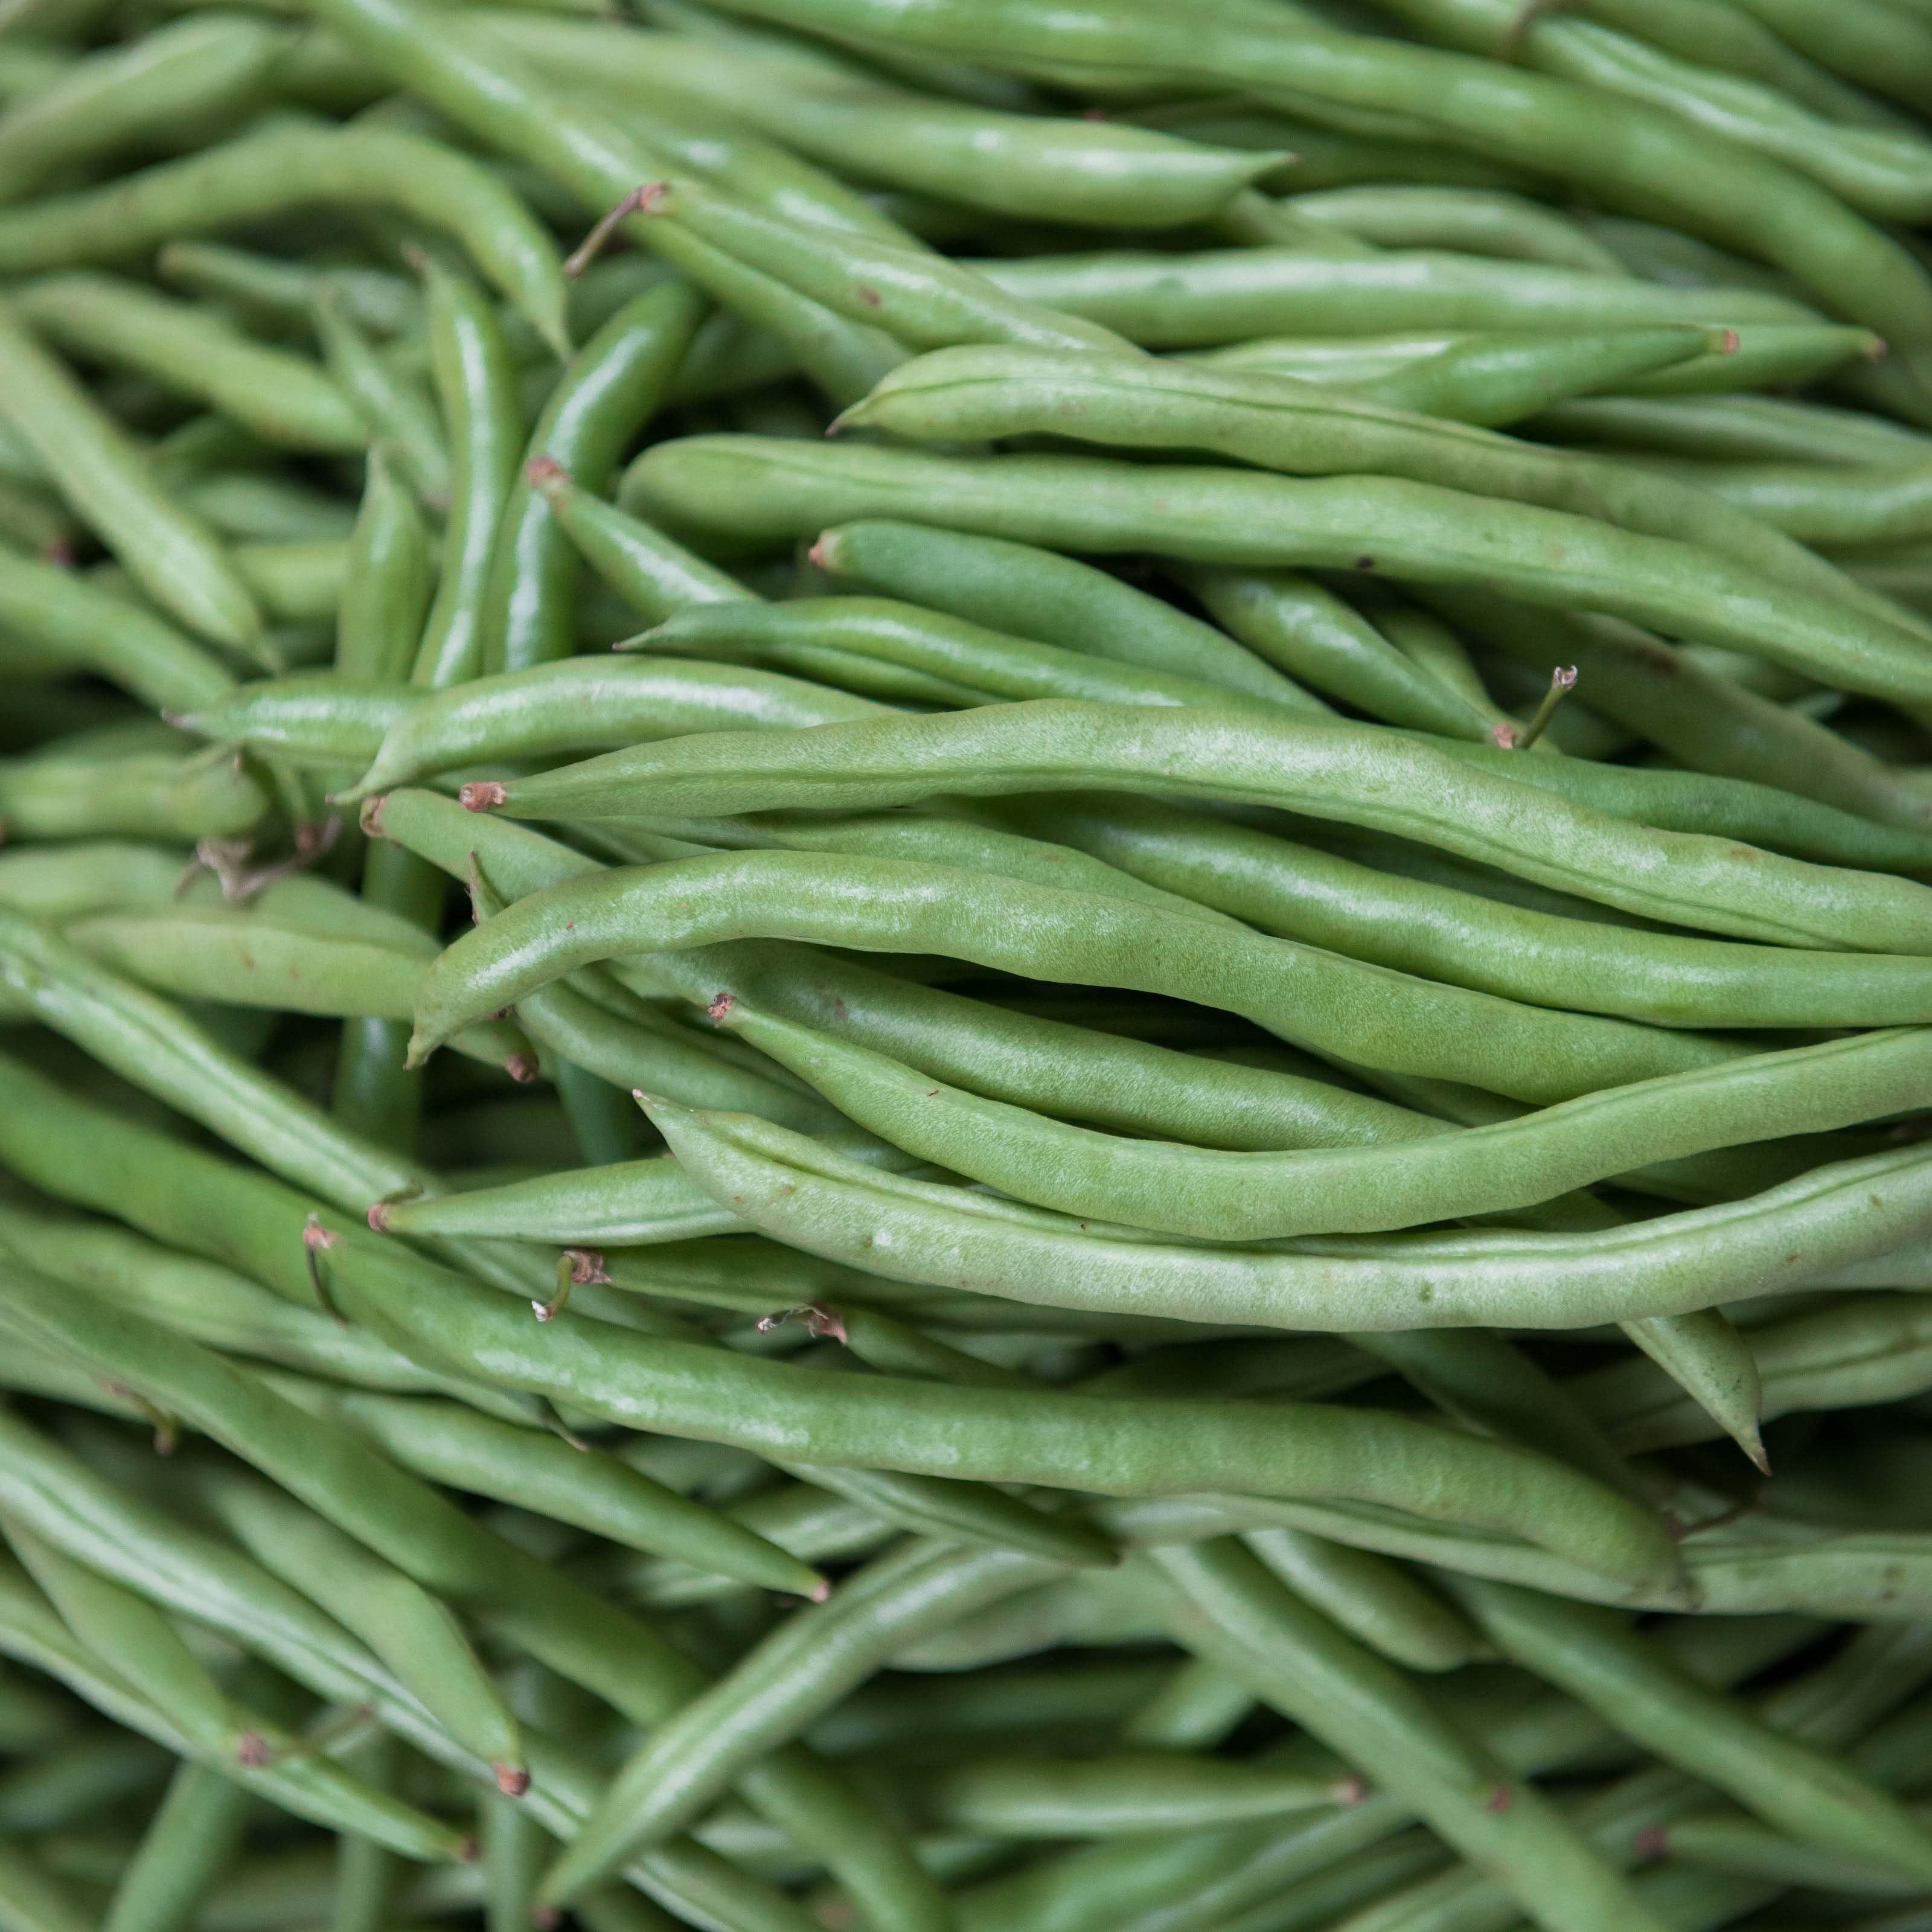 How much are canned green beans at Aldi? 